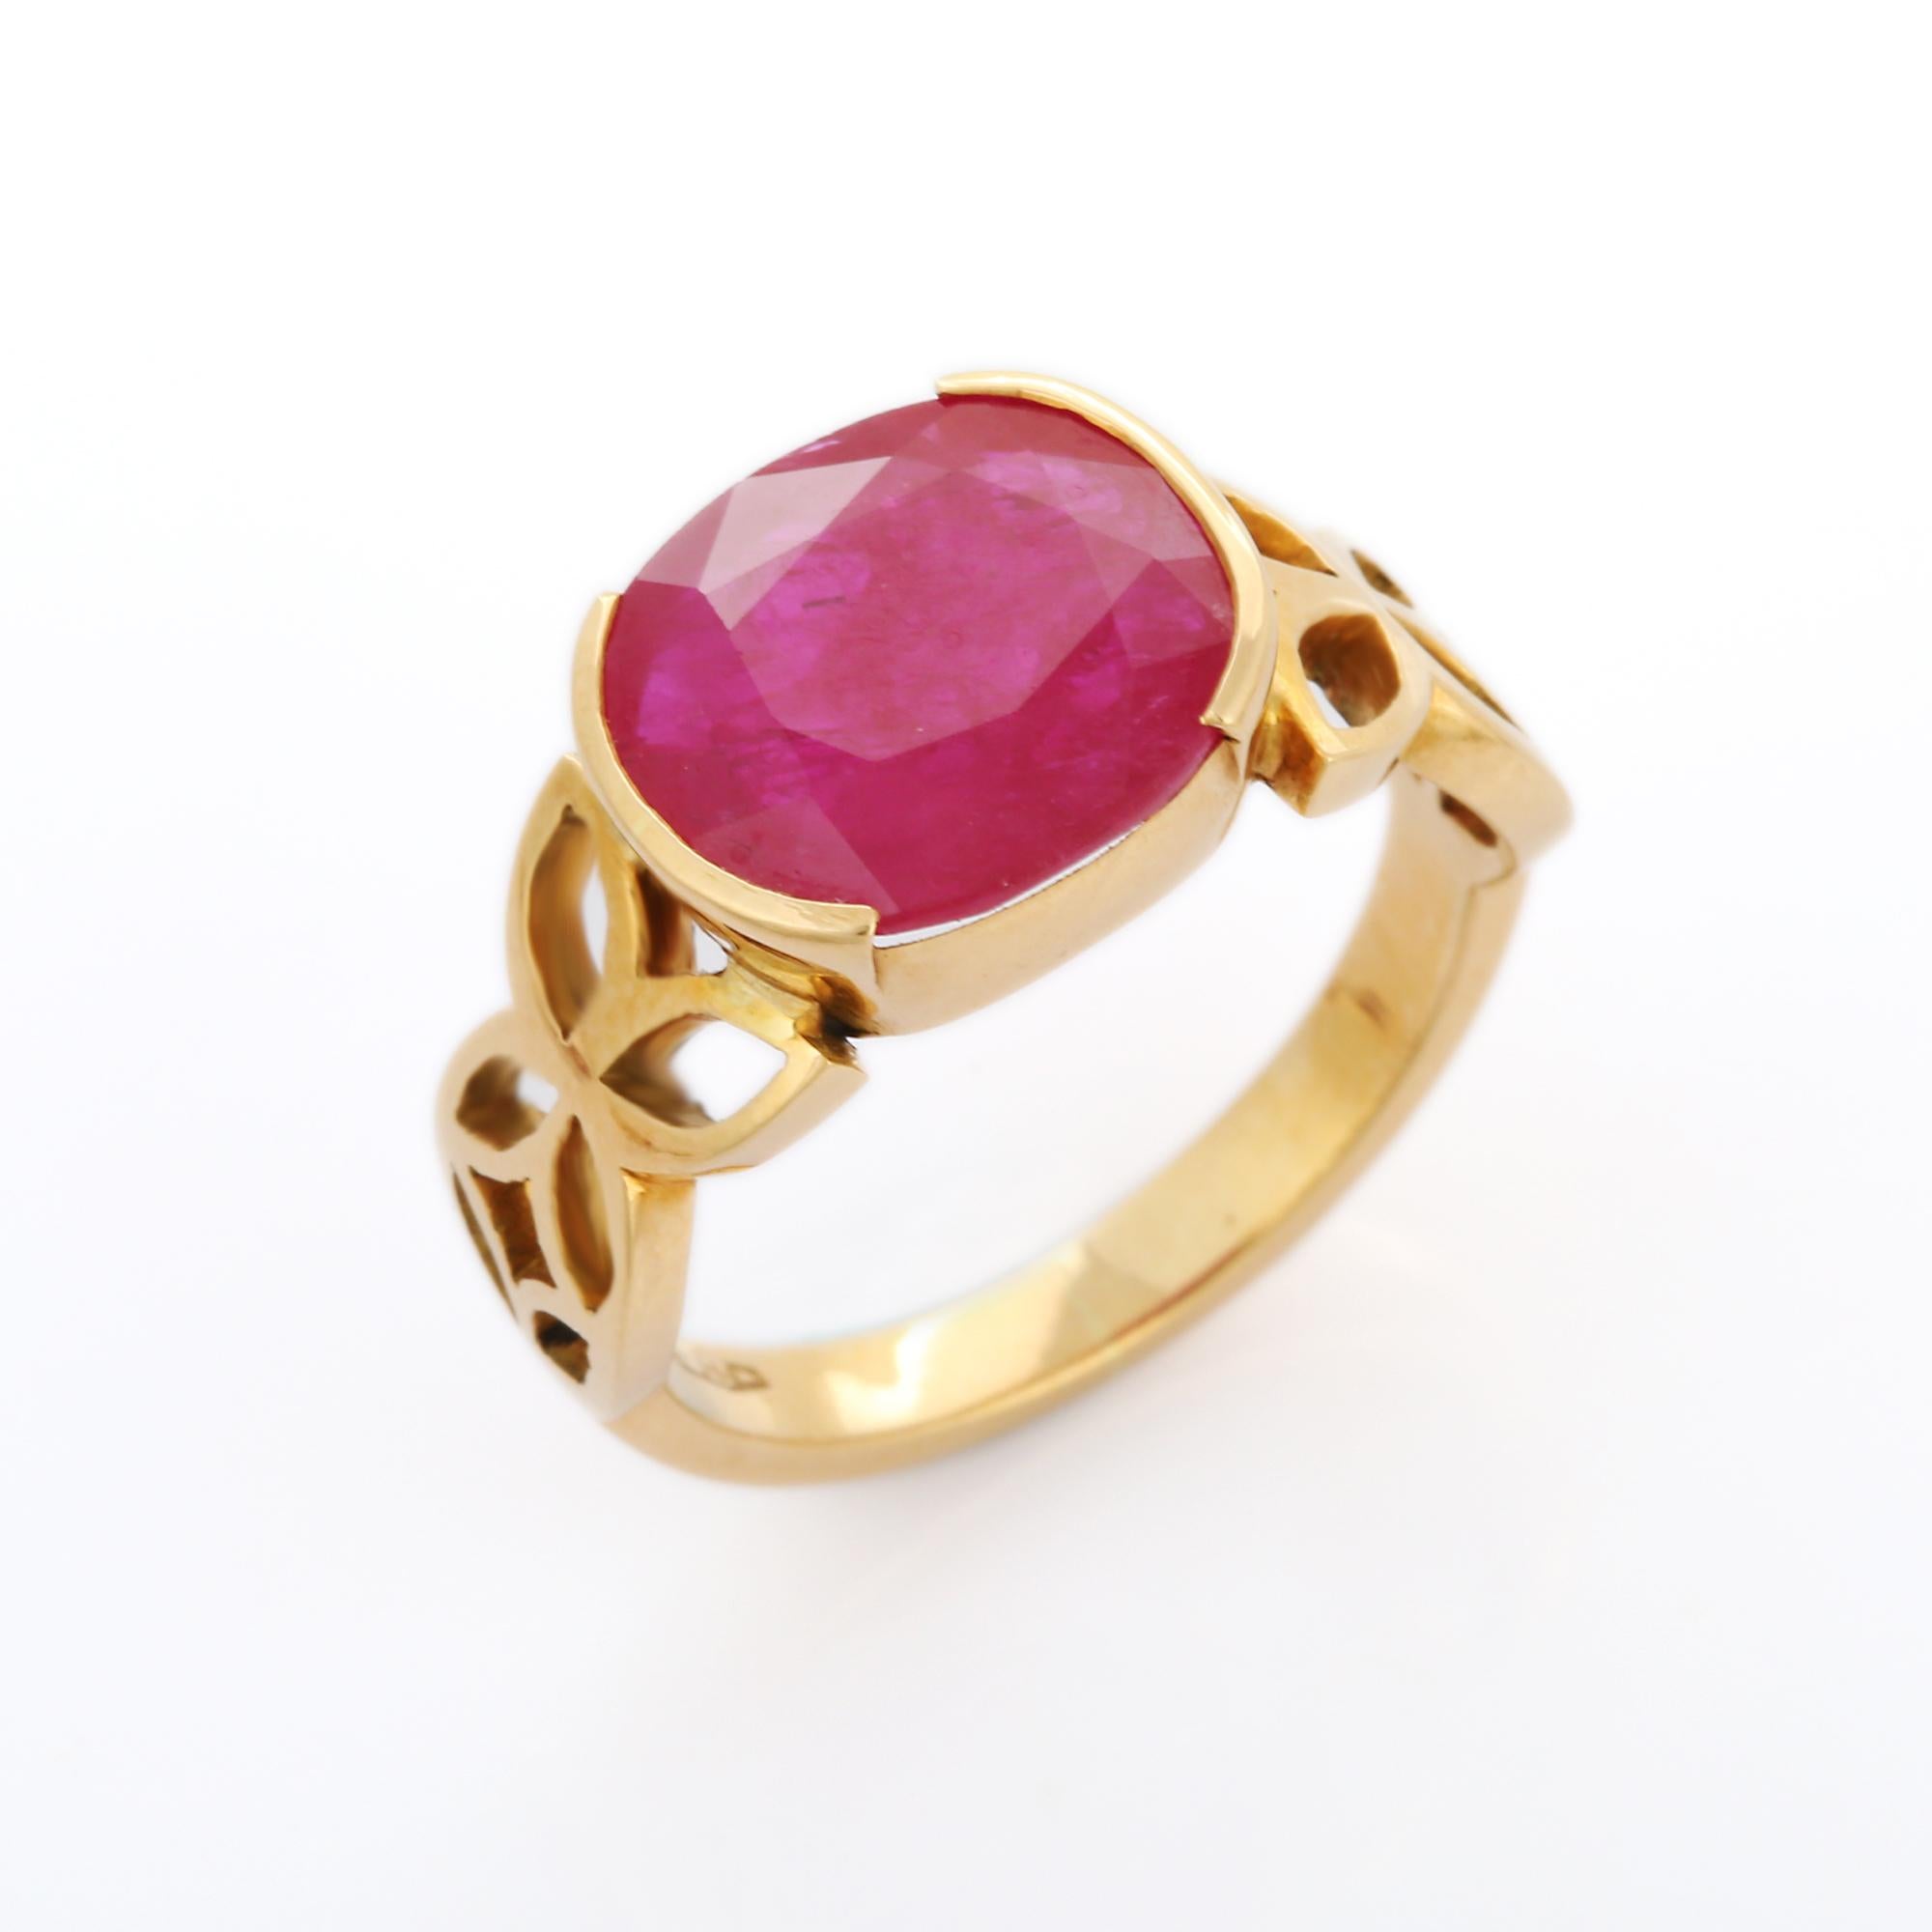 For Sale:  4.6 Carat Ruby Cocktail Ring with Engraving in 18K Solid Yellow Gold 6